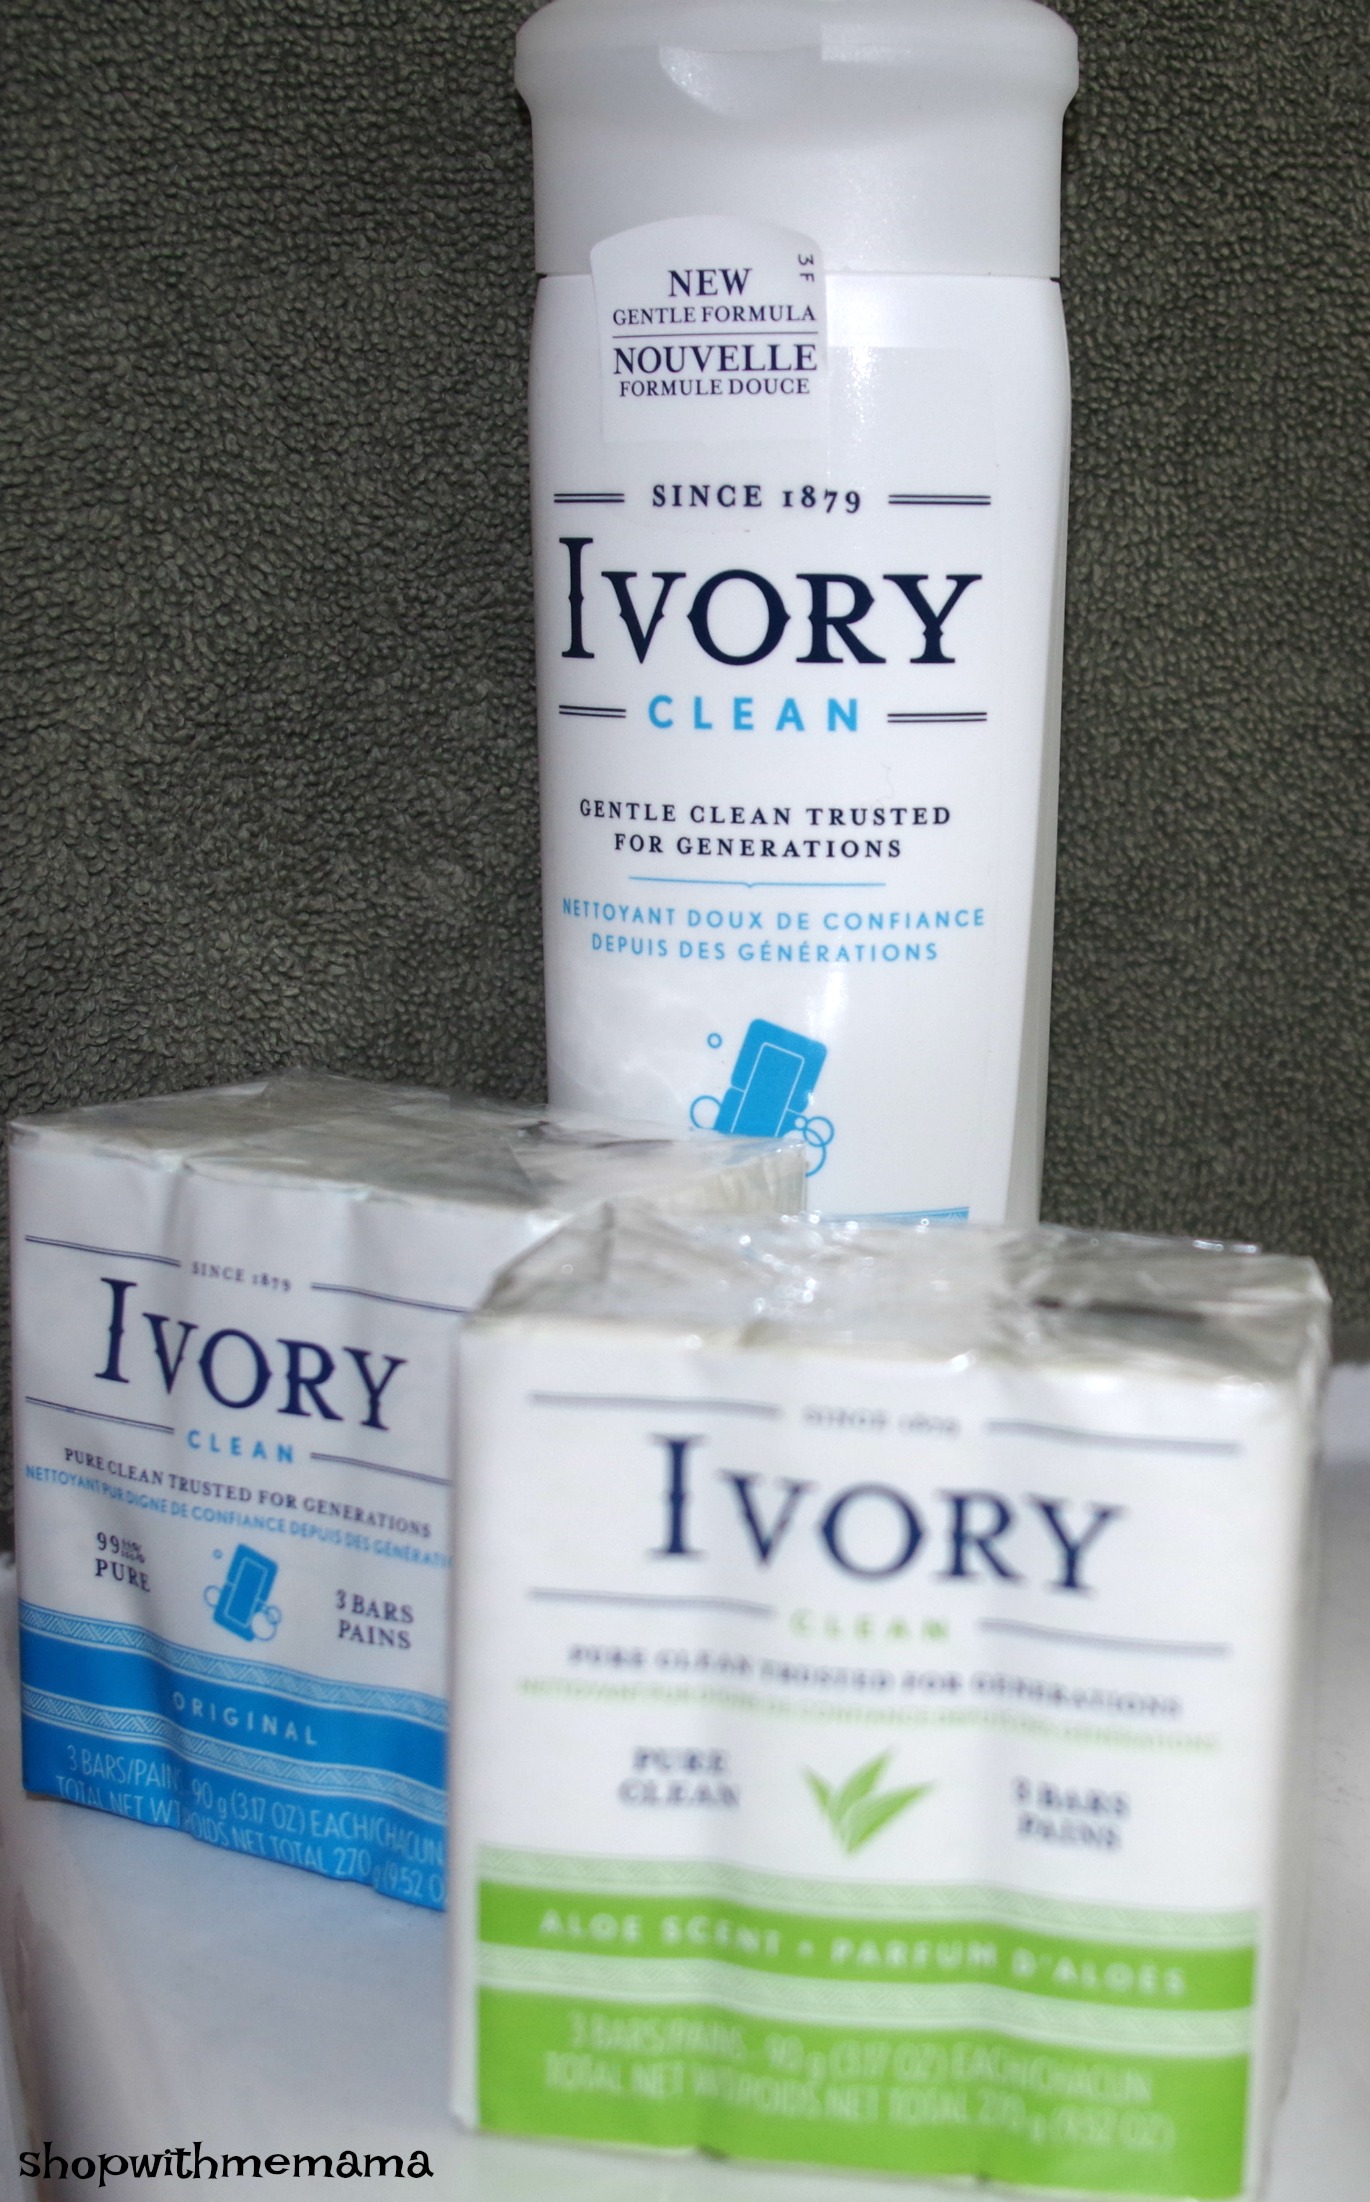 Ivory Provides A Pure Simple Clean For The Whole Family